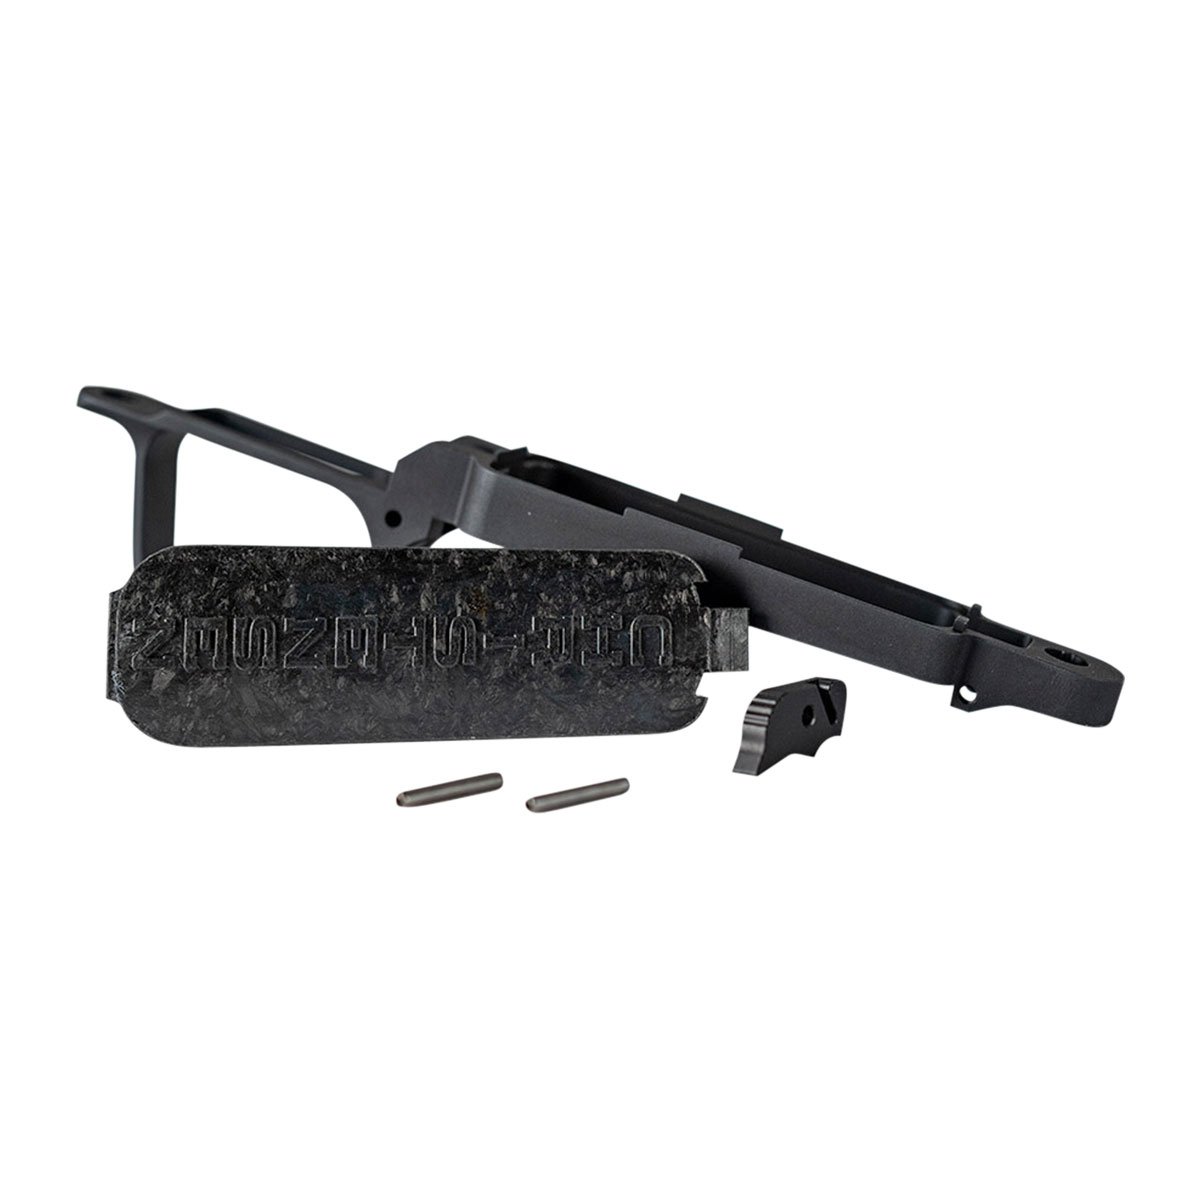 CHRISTENSEN ARMS - FFT LONG ACTION CF BOTTOM METAL FLOOR PLATE ASSEMBLY